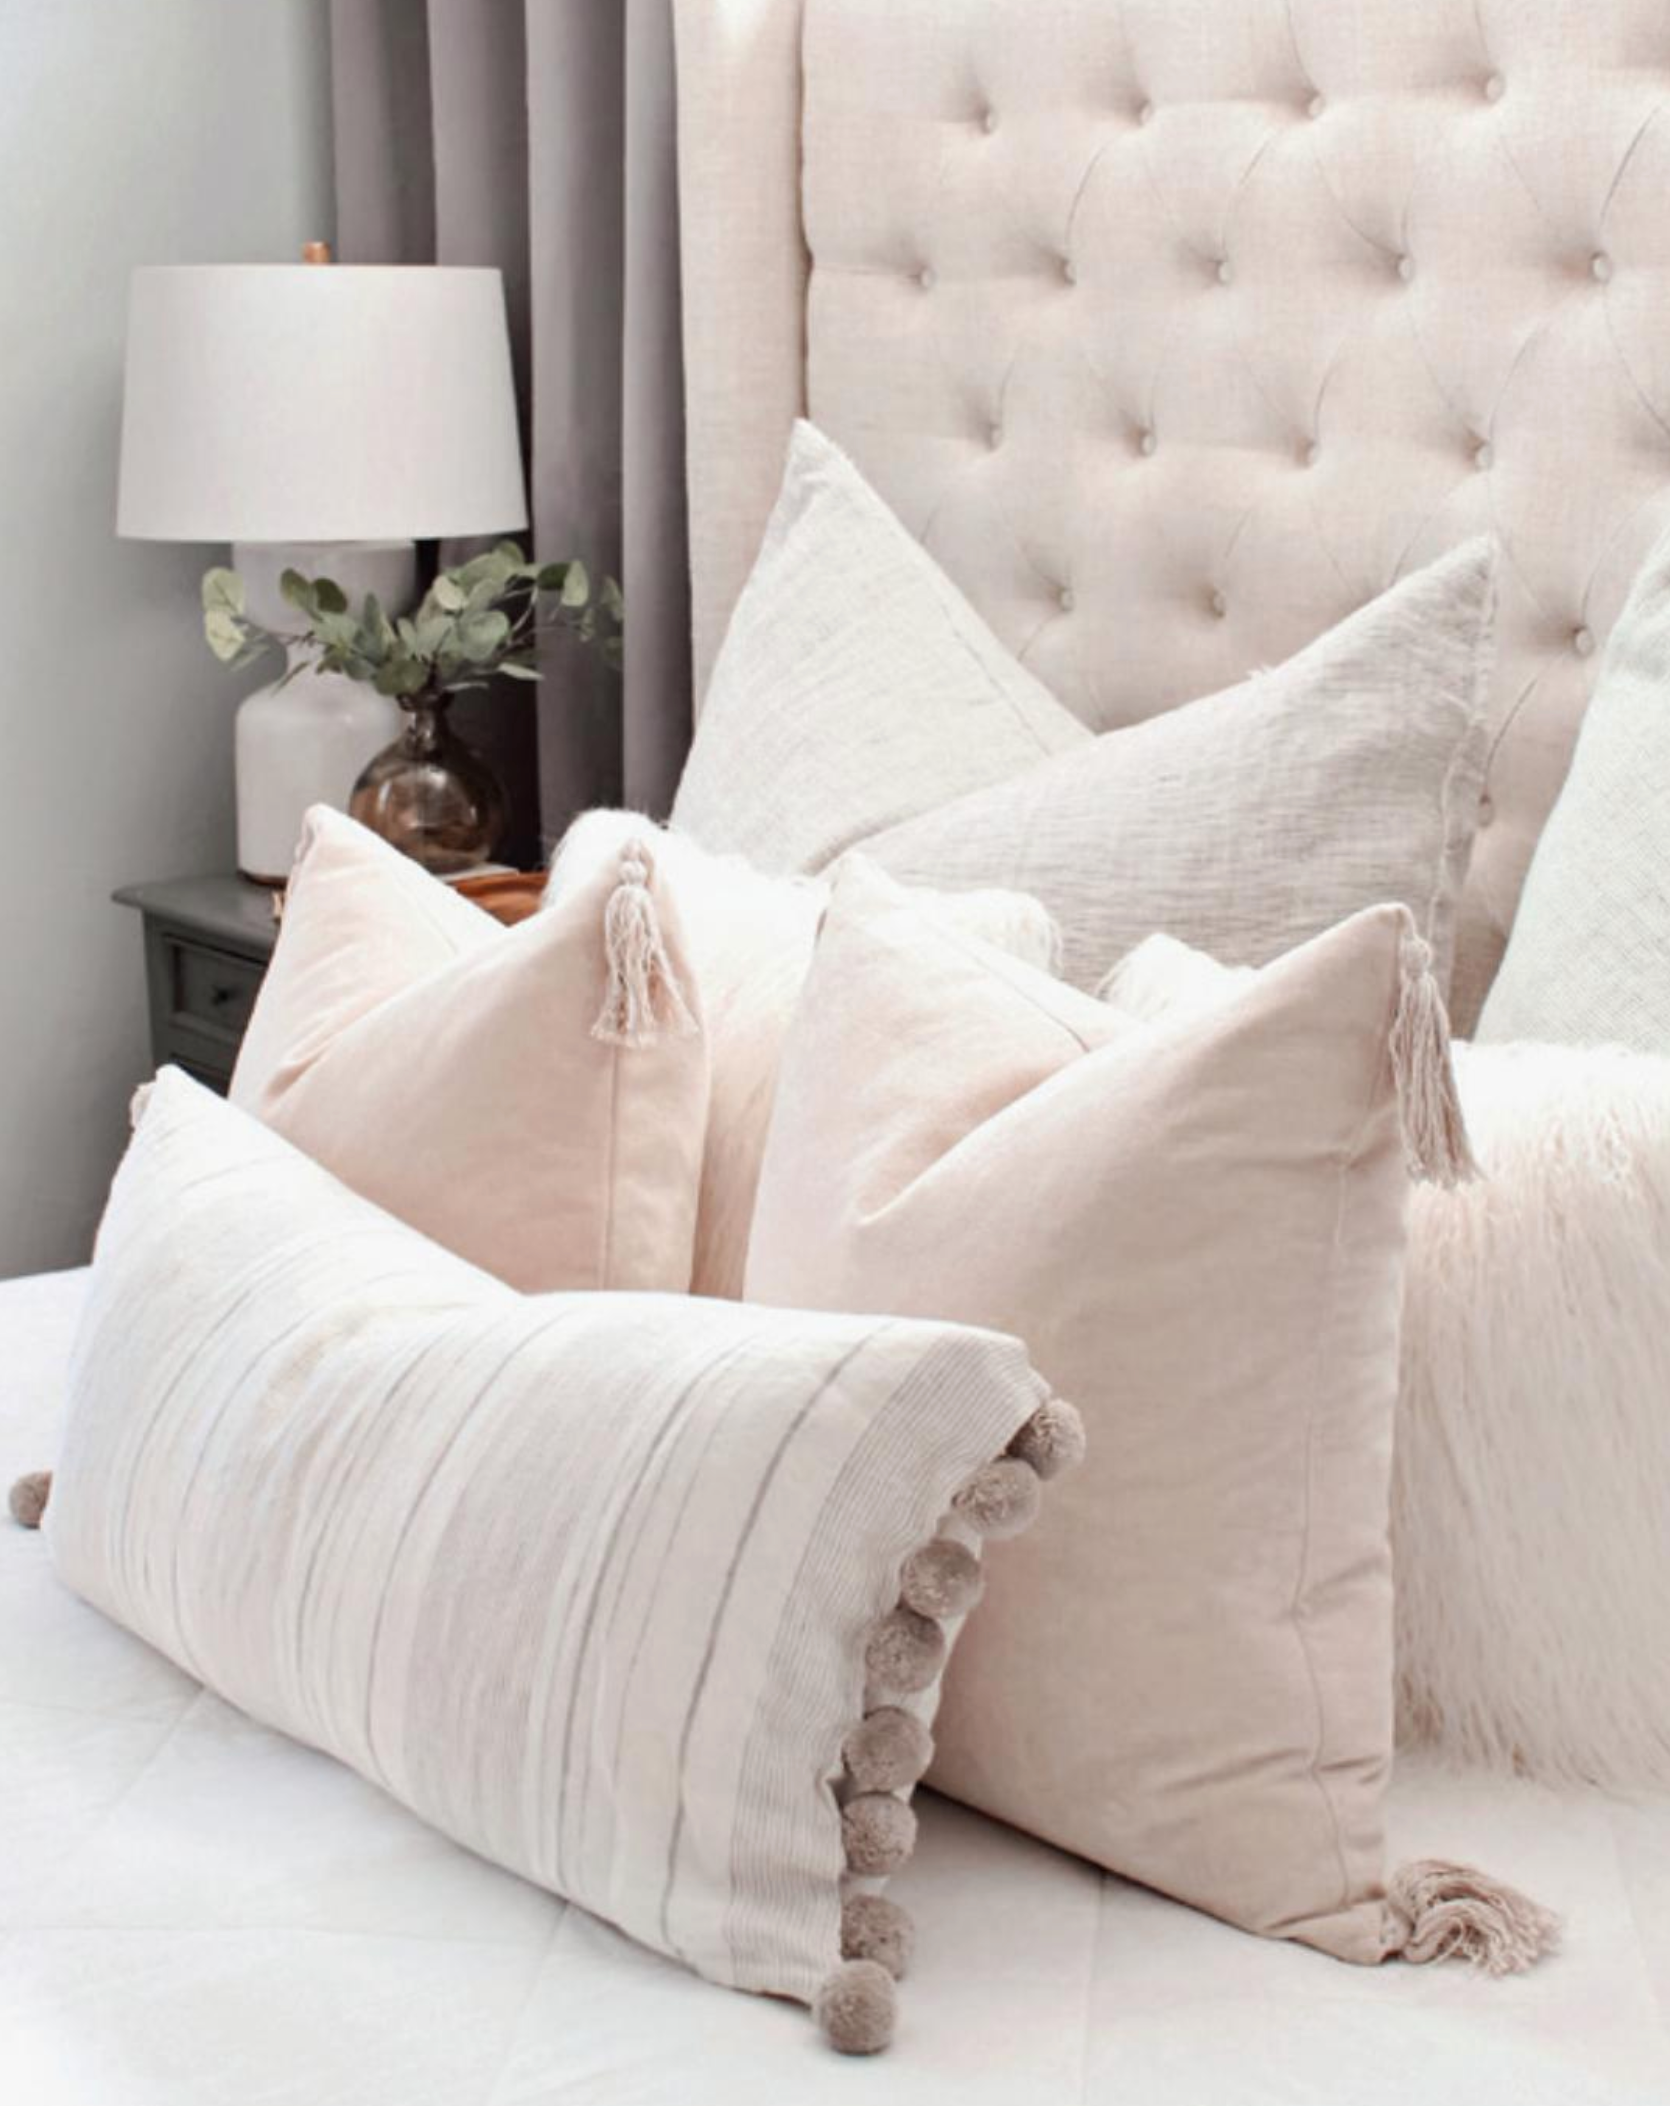 decorative pillows on a bed